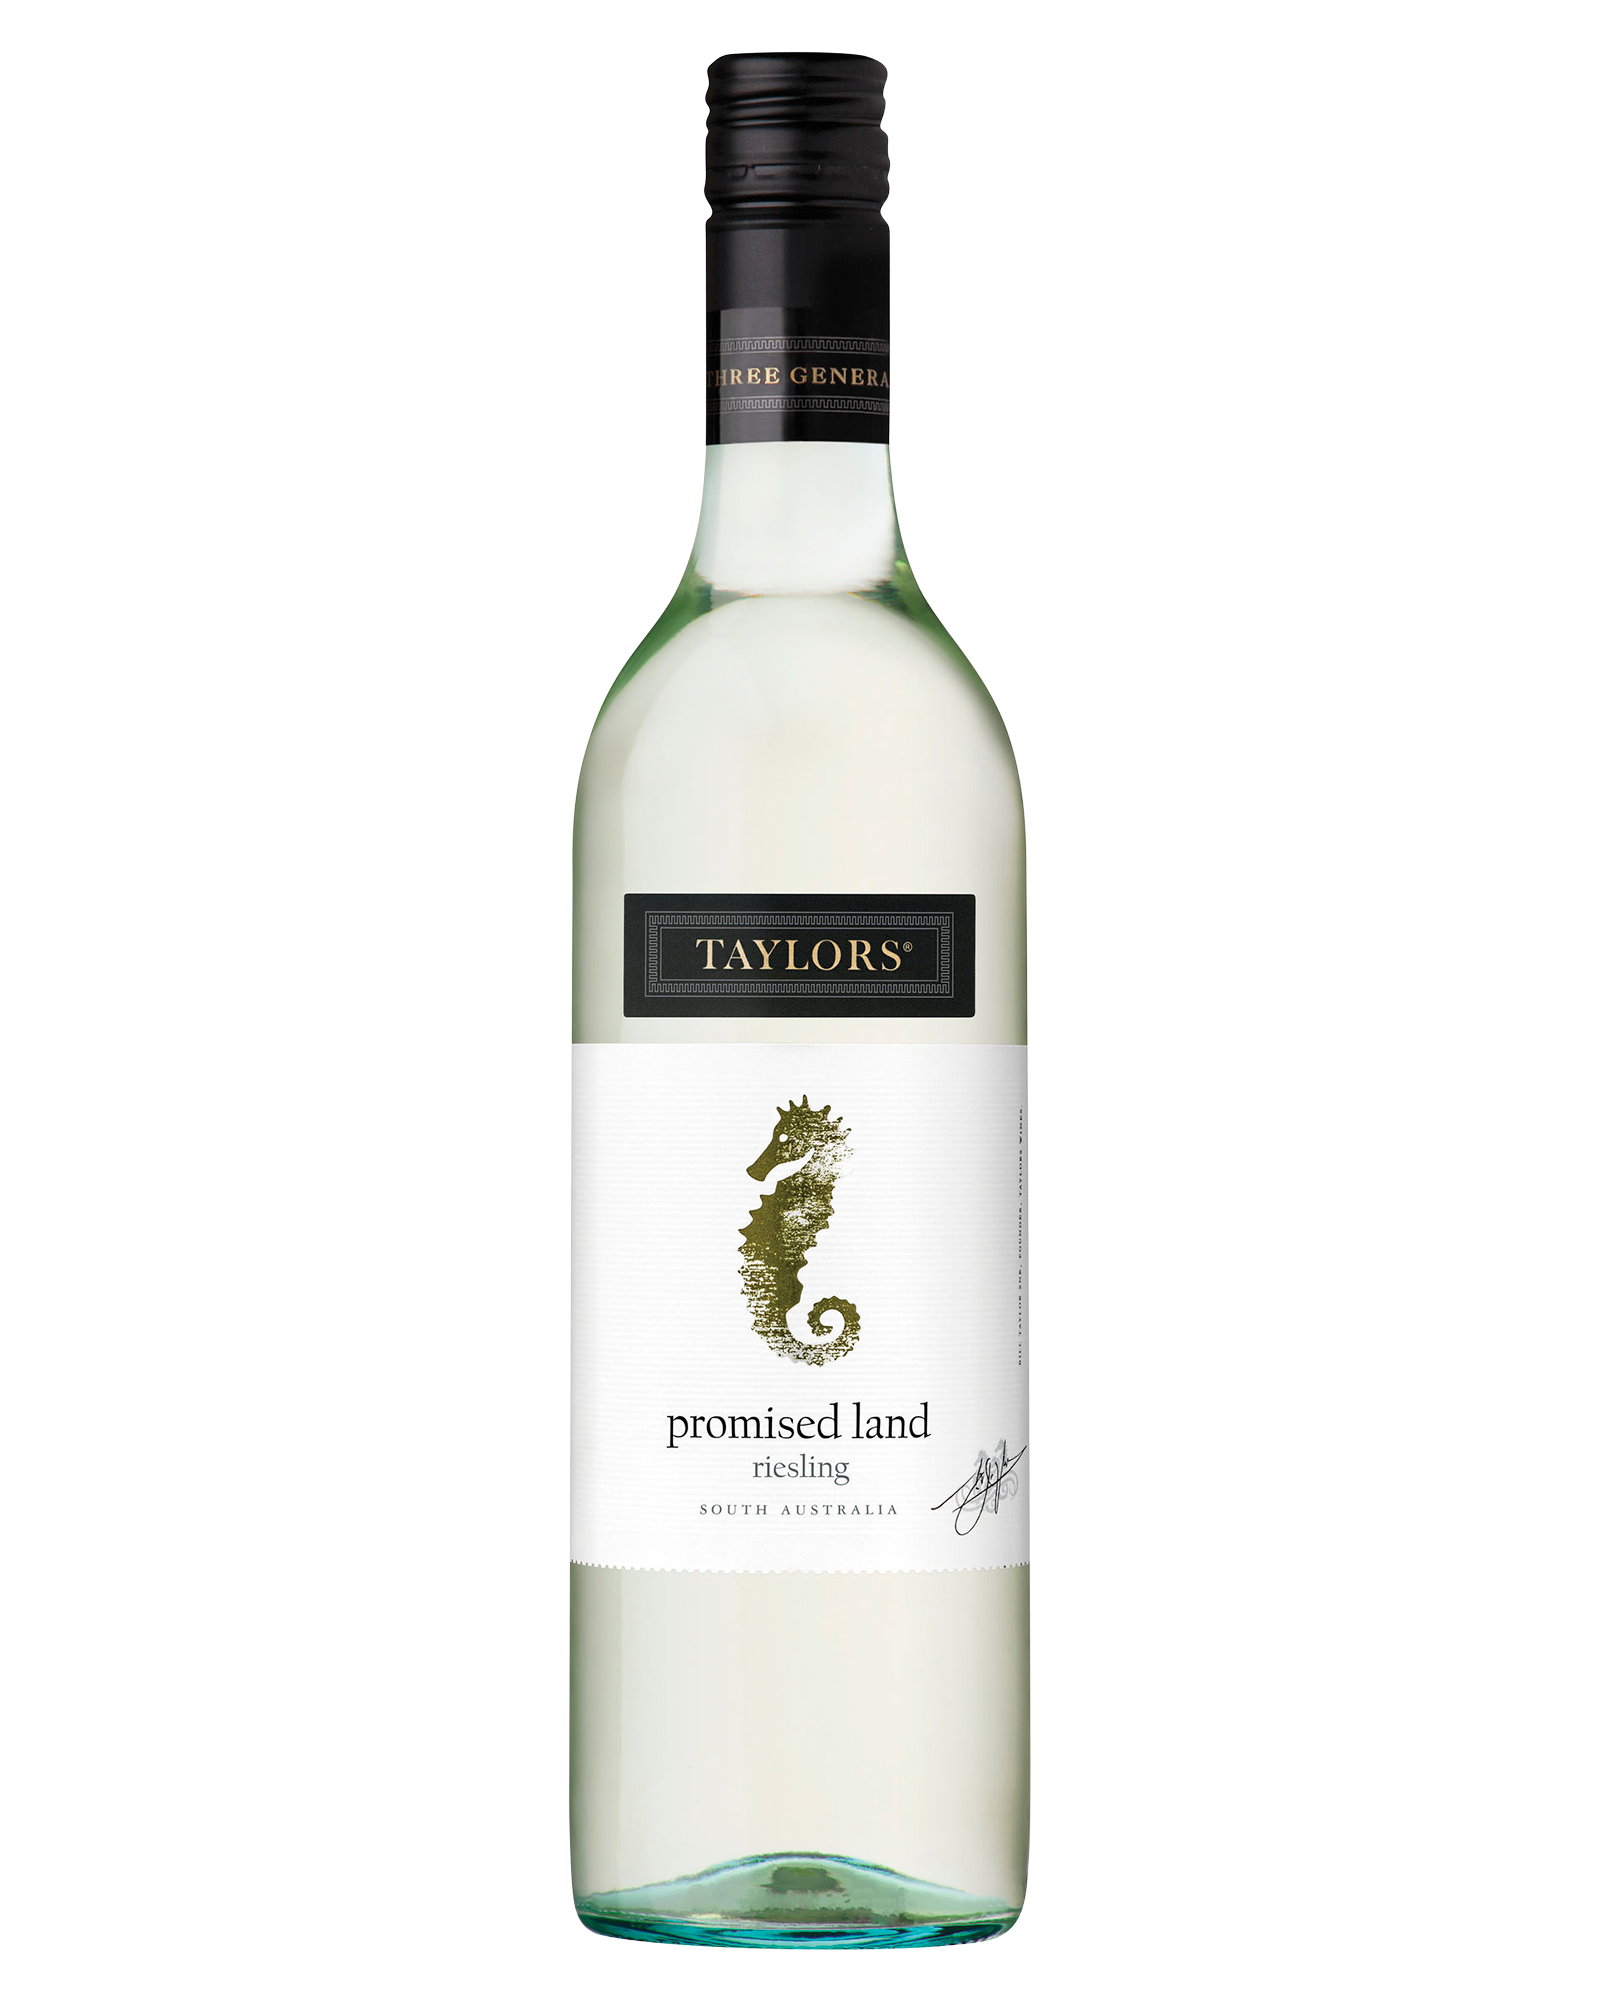 Taylors Promised Land Riesling